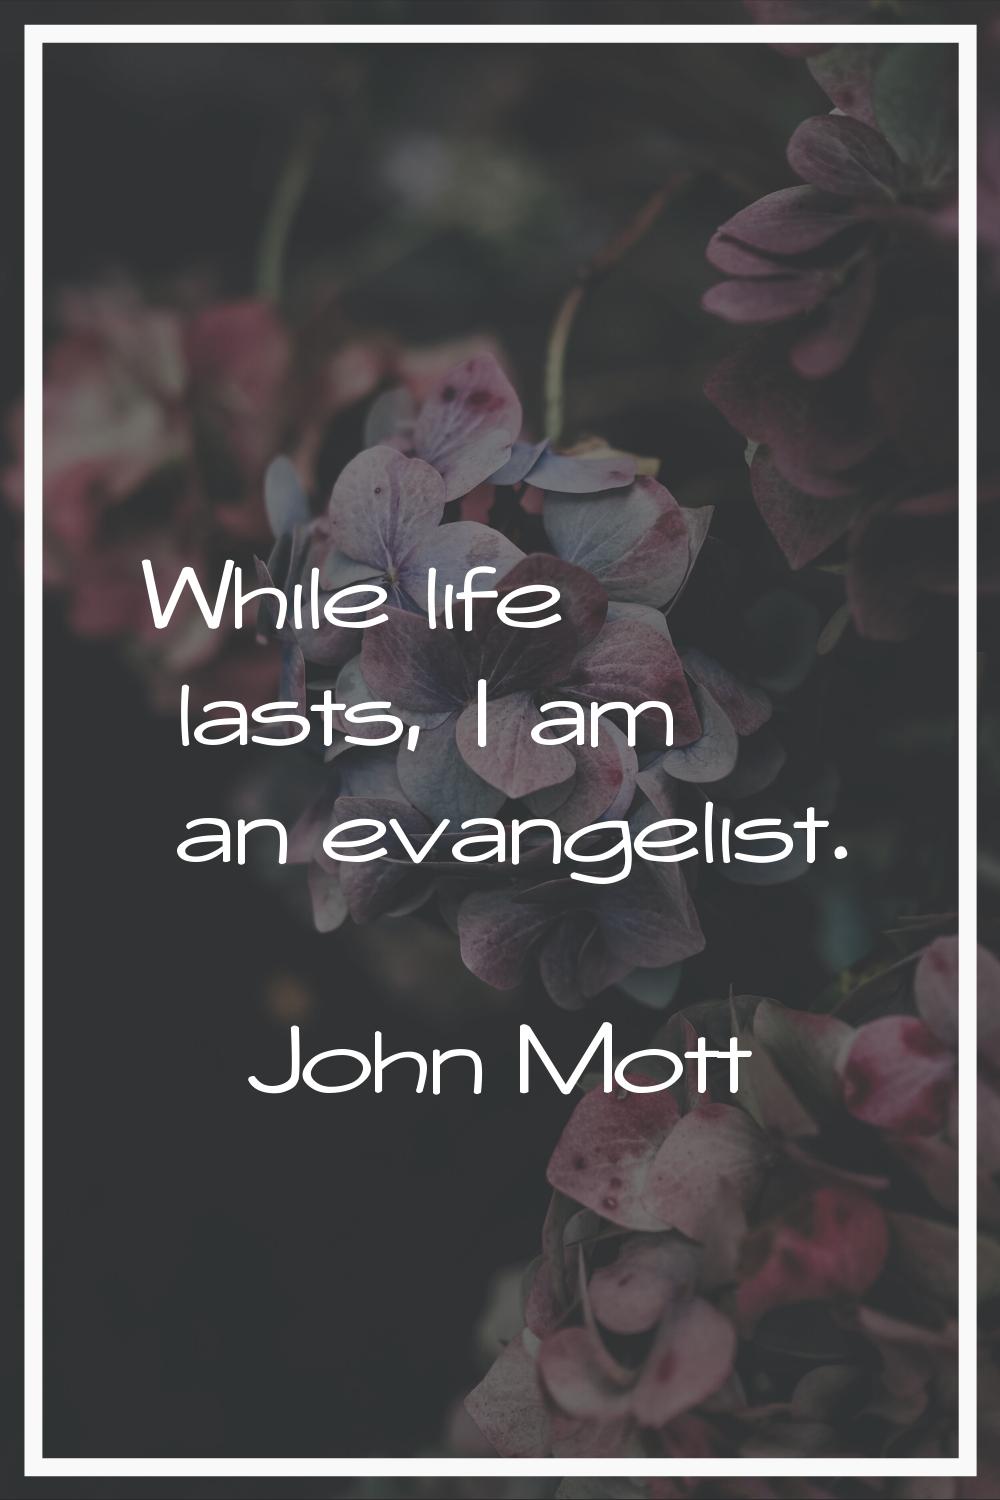 While life lasts, I am an evangelist.